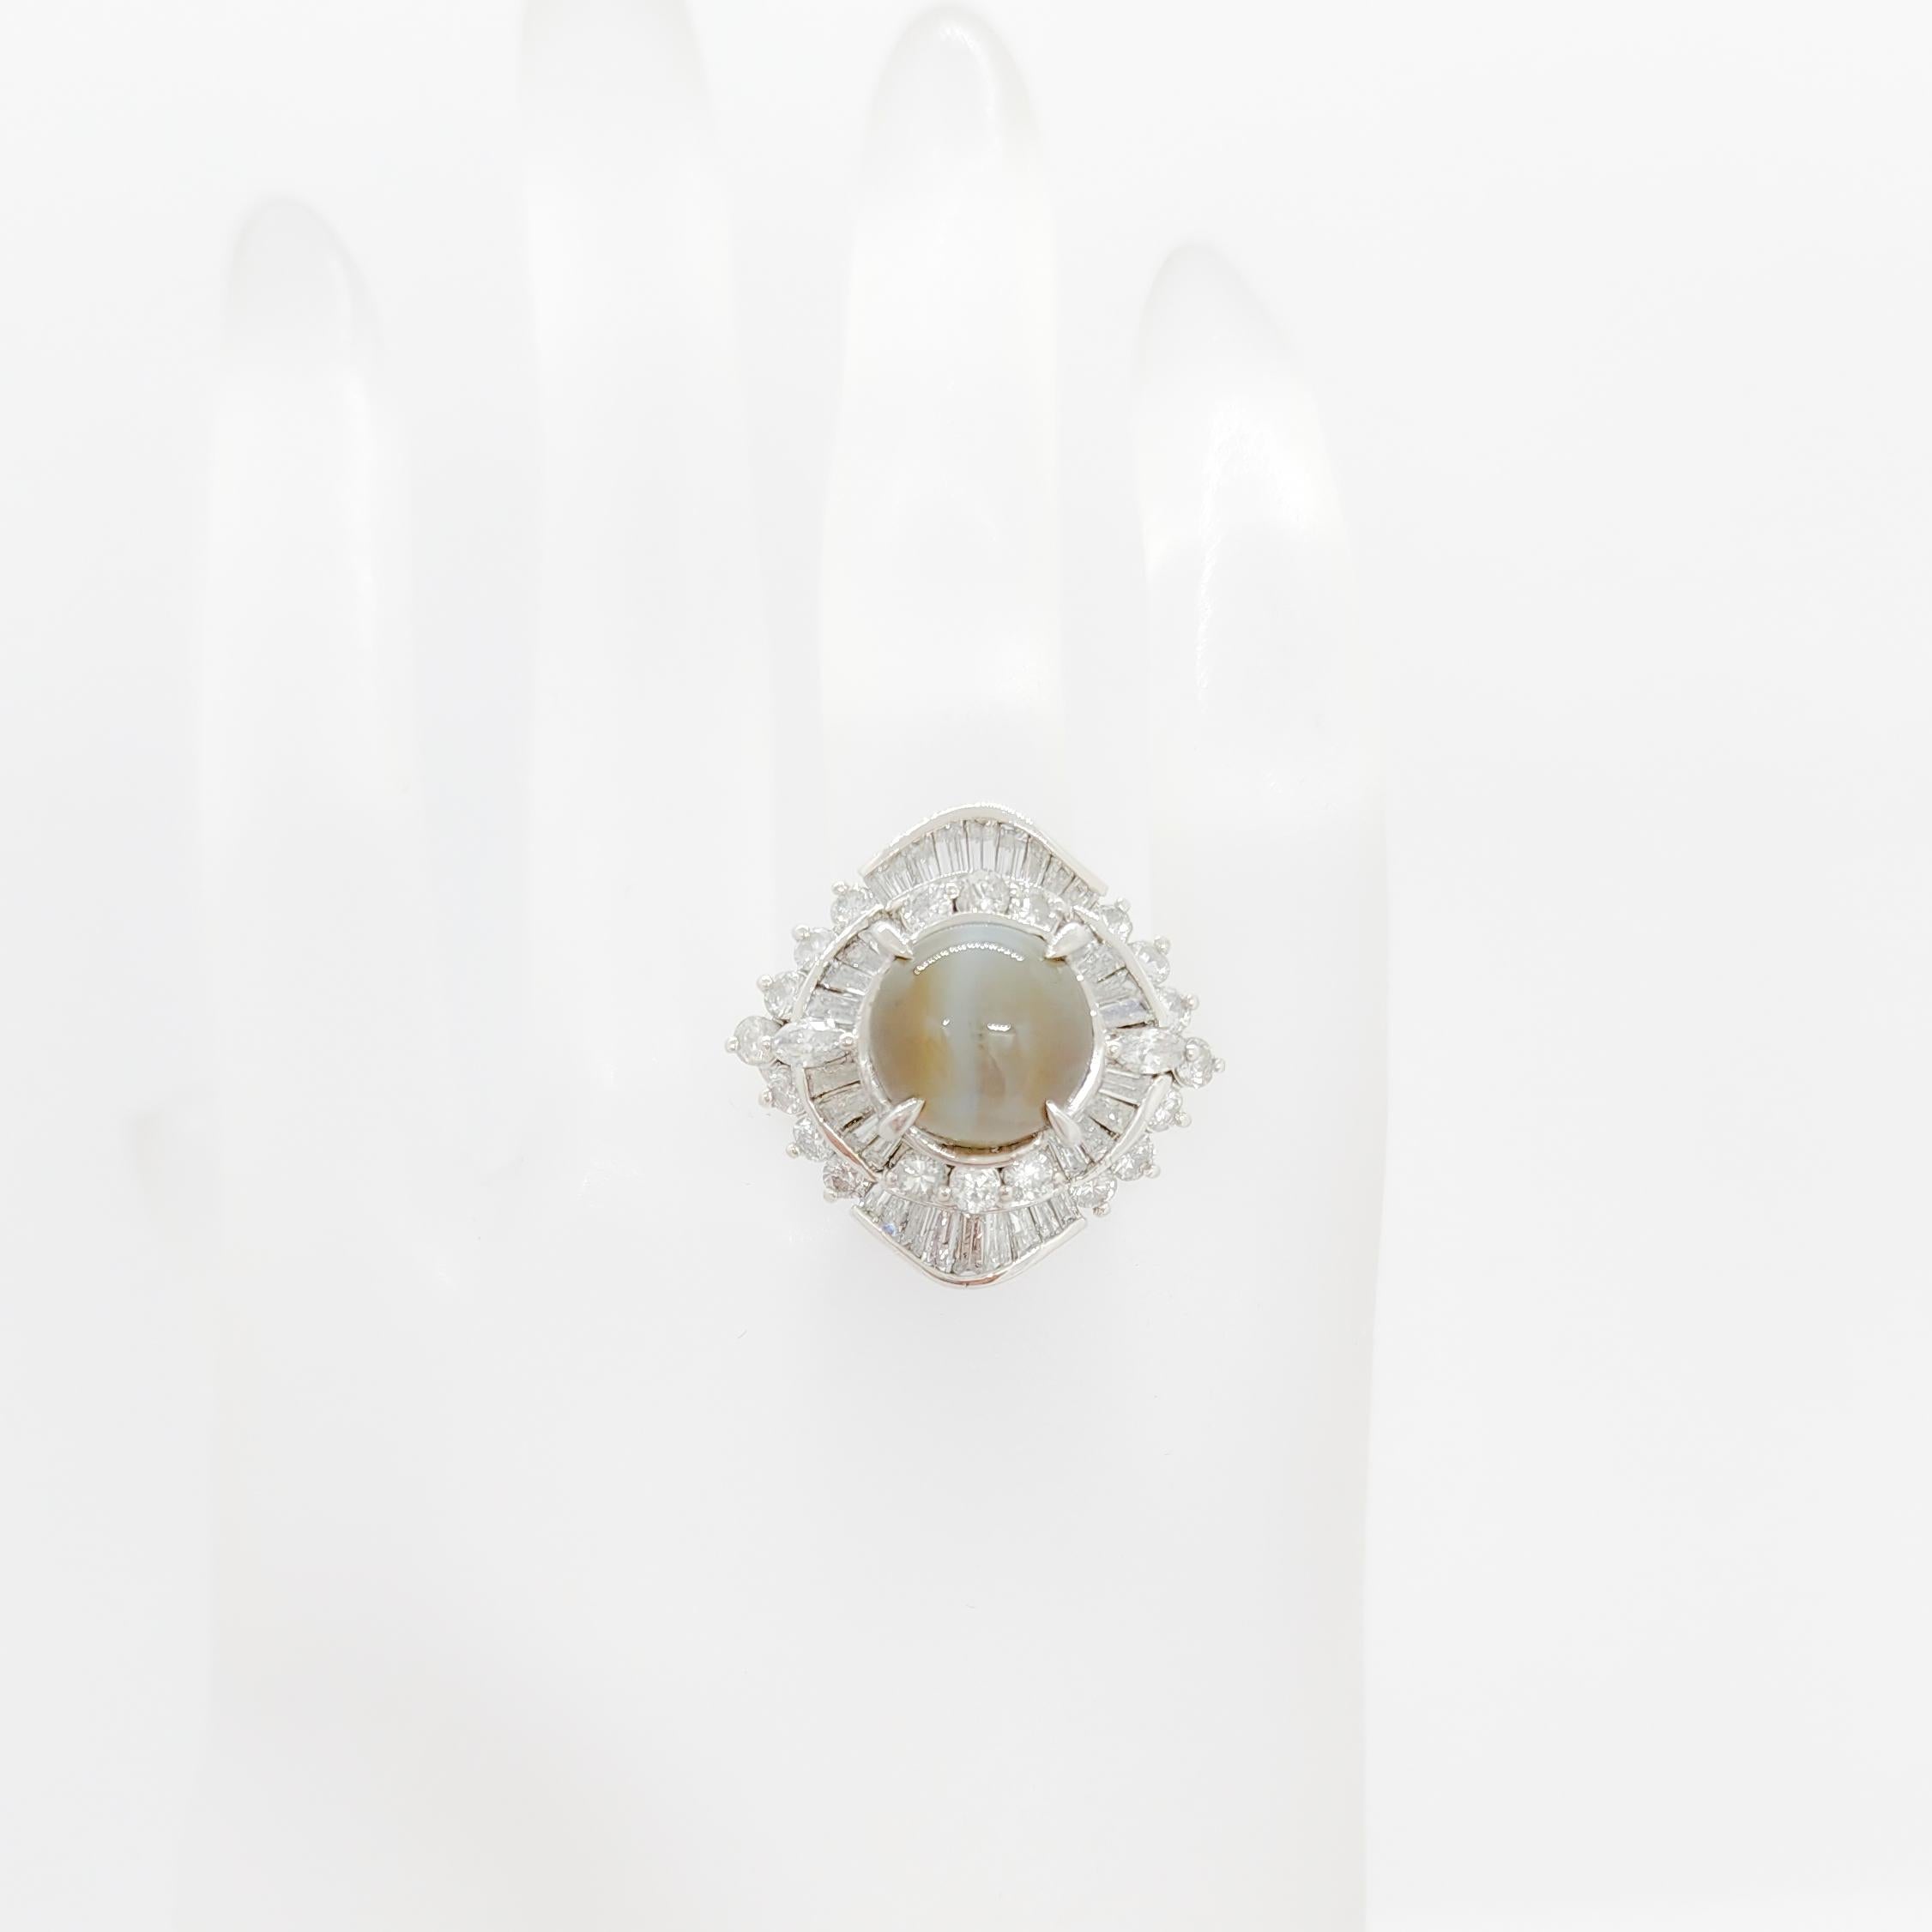 Cat's Eye Chrysoberyl Cabochon Round and White Diamond Cocktail Ring 1